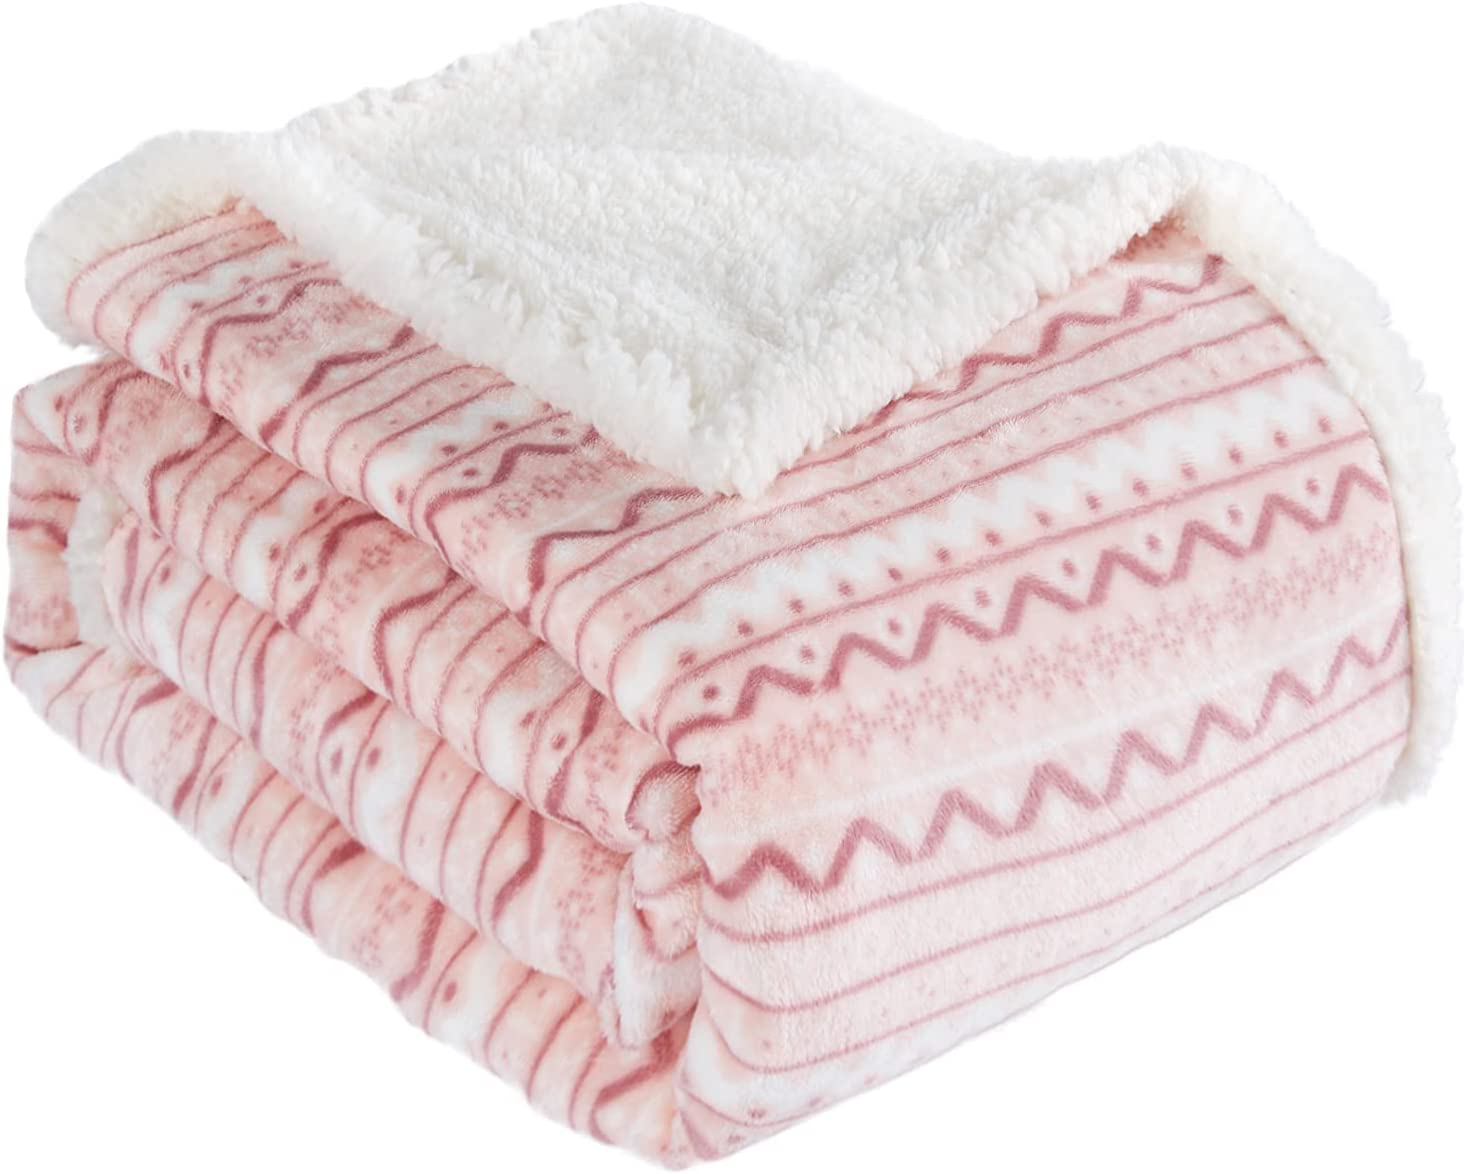 Super Lowest Price Couples Throw Blanket - Sherpa Fleece Throw Blanket for Young Girls Super Soft Fuzzy Cozy Plush Pink Sherpa Plush Throw Blanket for Kids Children Teens or Adult for Sofa Couch B...